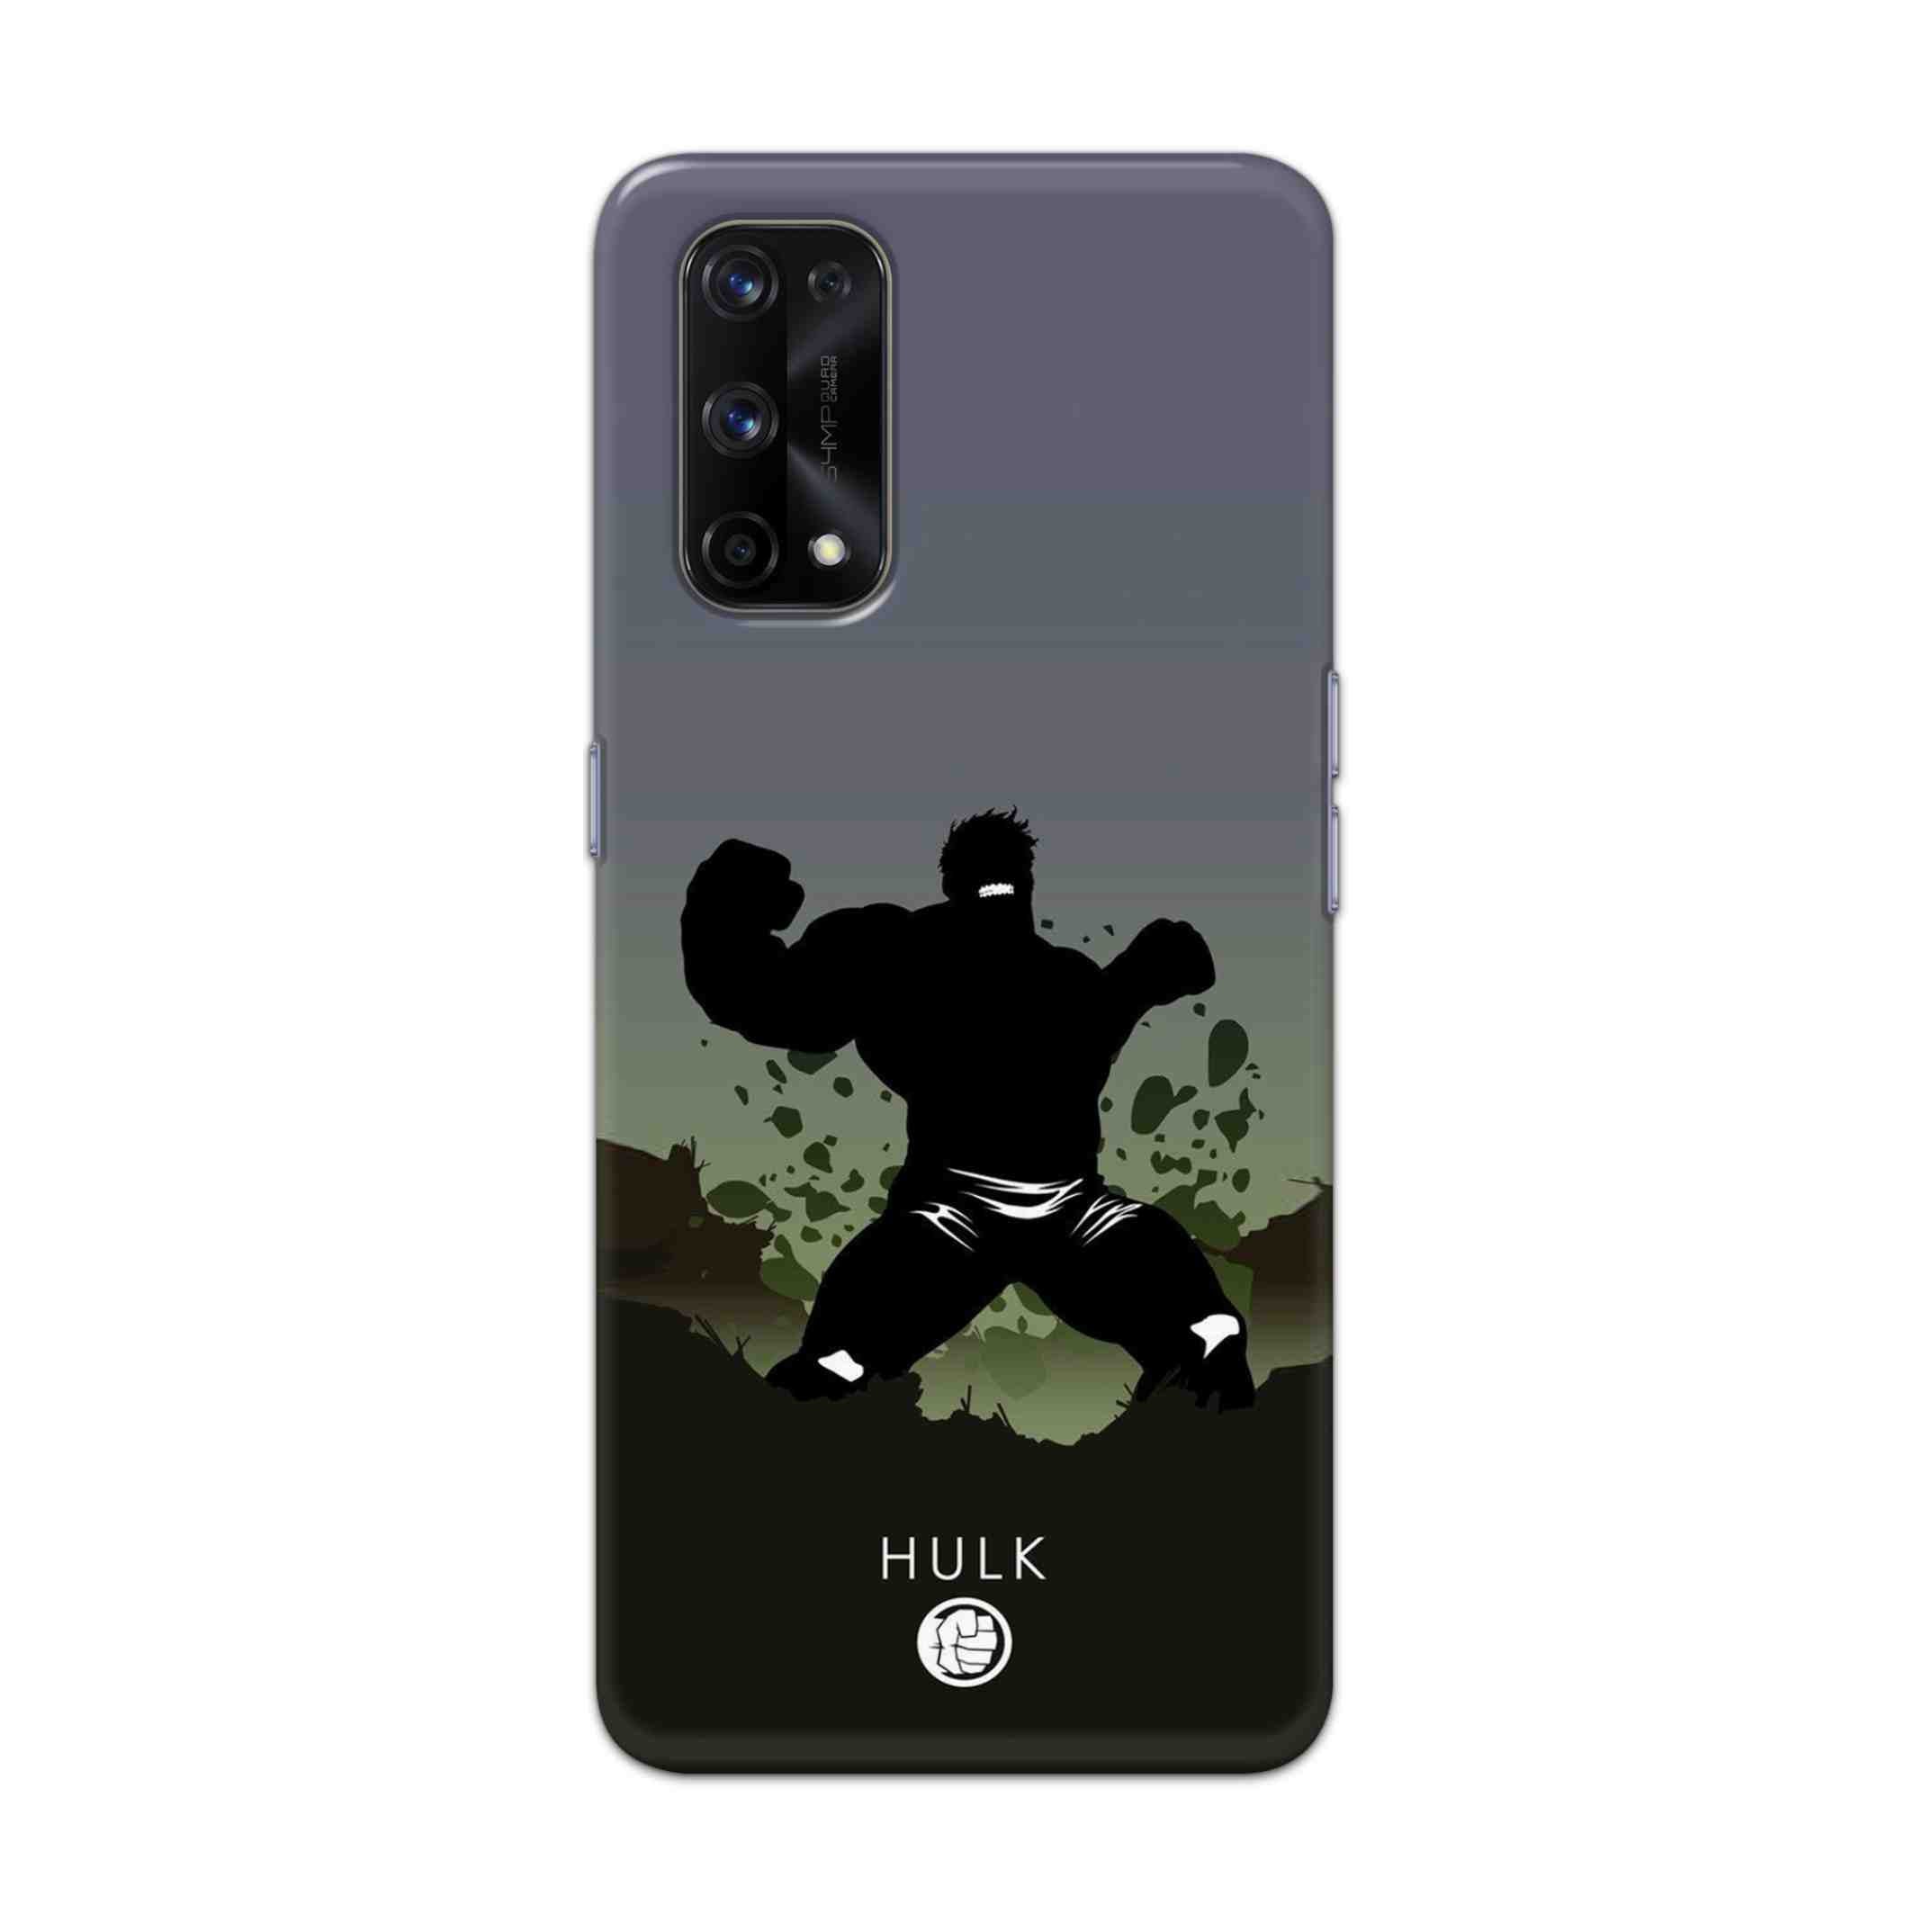 Buy Hulk Drax Hard Back Mobile Phone Case Cover For Realme X7 Pro Online